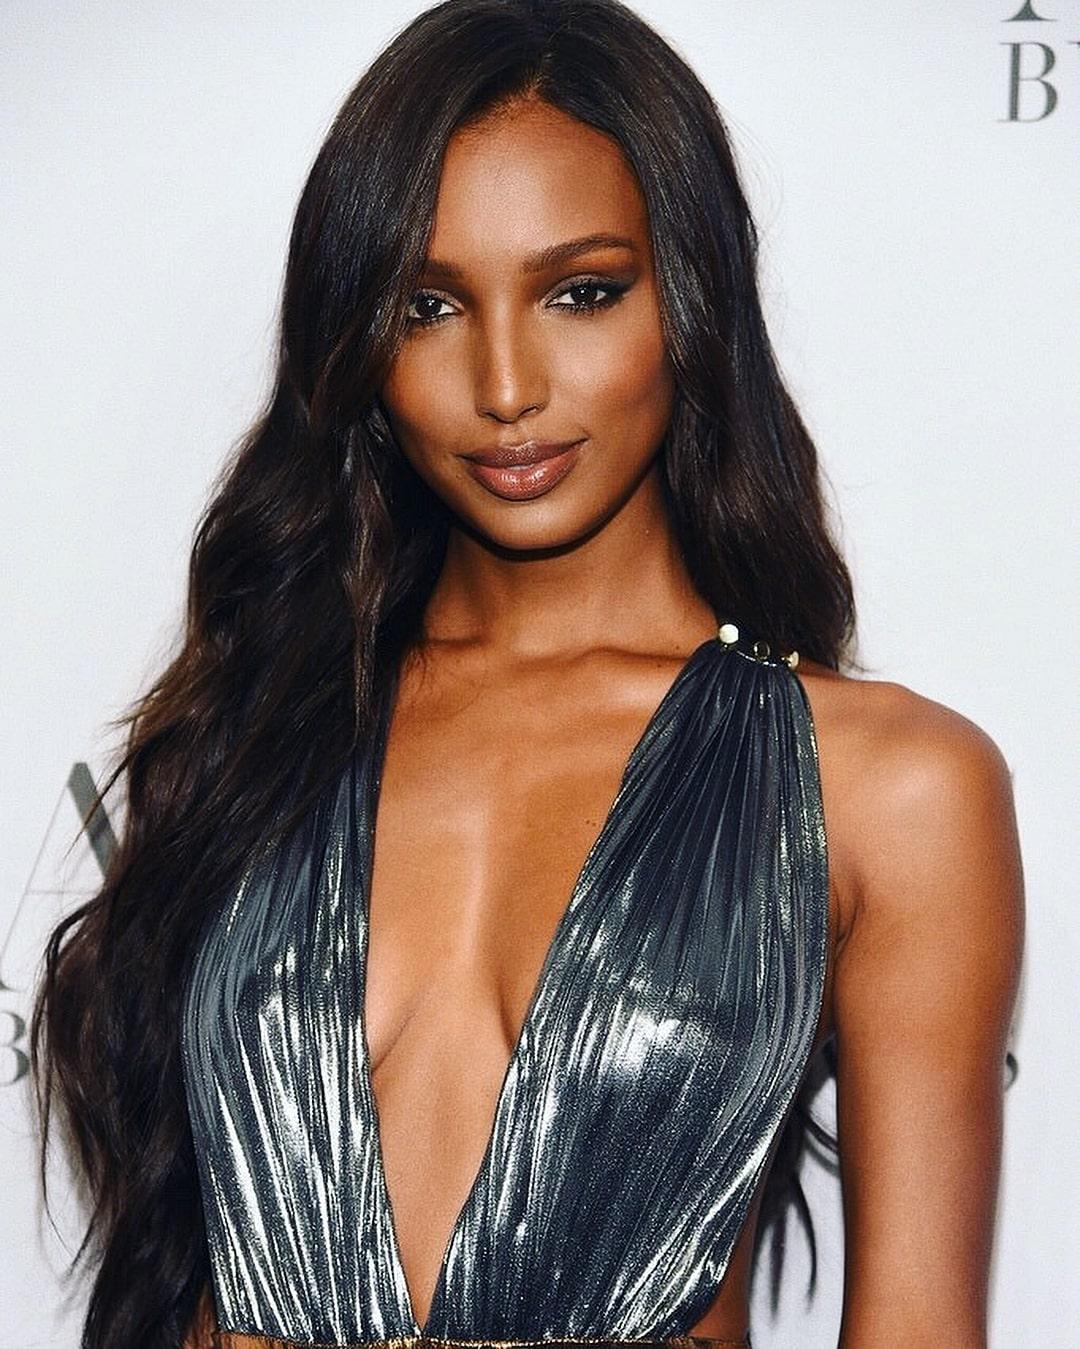 Hot And Picture Of Jasmine Tookes Will Make You Want Her Now